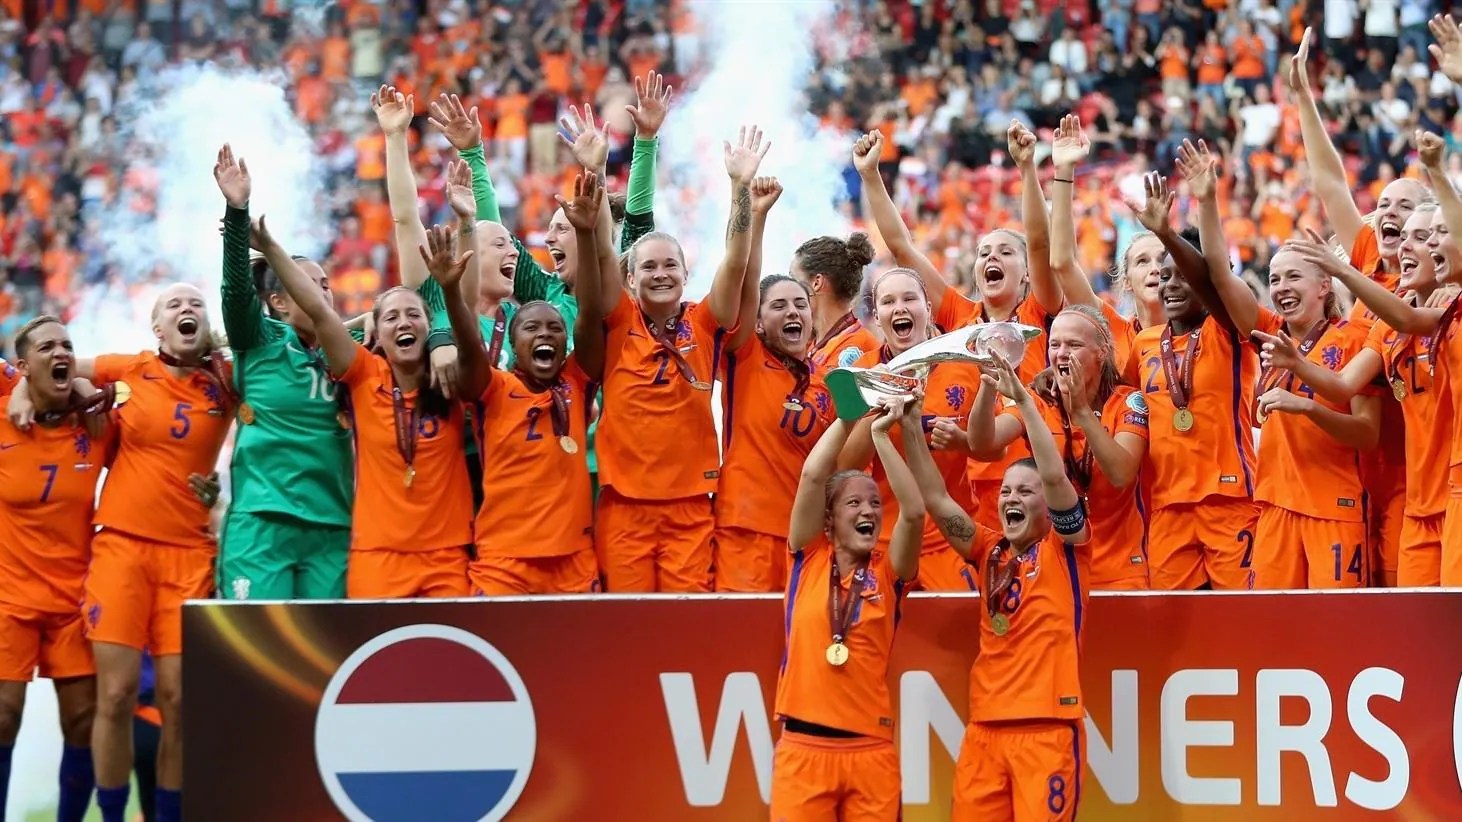 UEFA Women's EURO 2022: All you need to know about the Women's Euro 2022 hosted in England, Live Streaming, Dates, Tickets, Prize and more